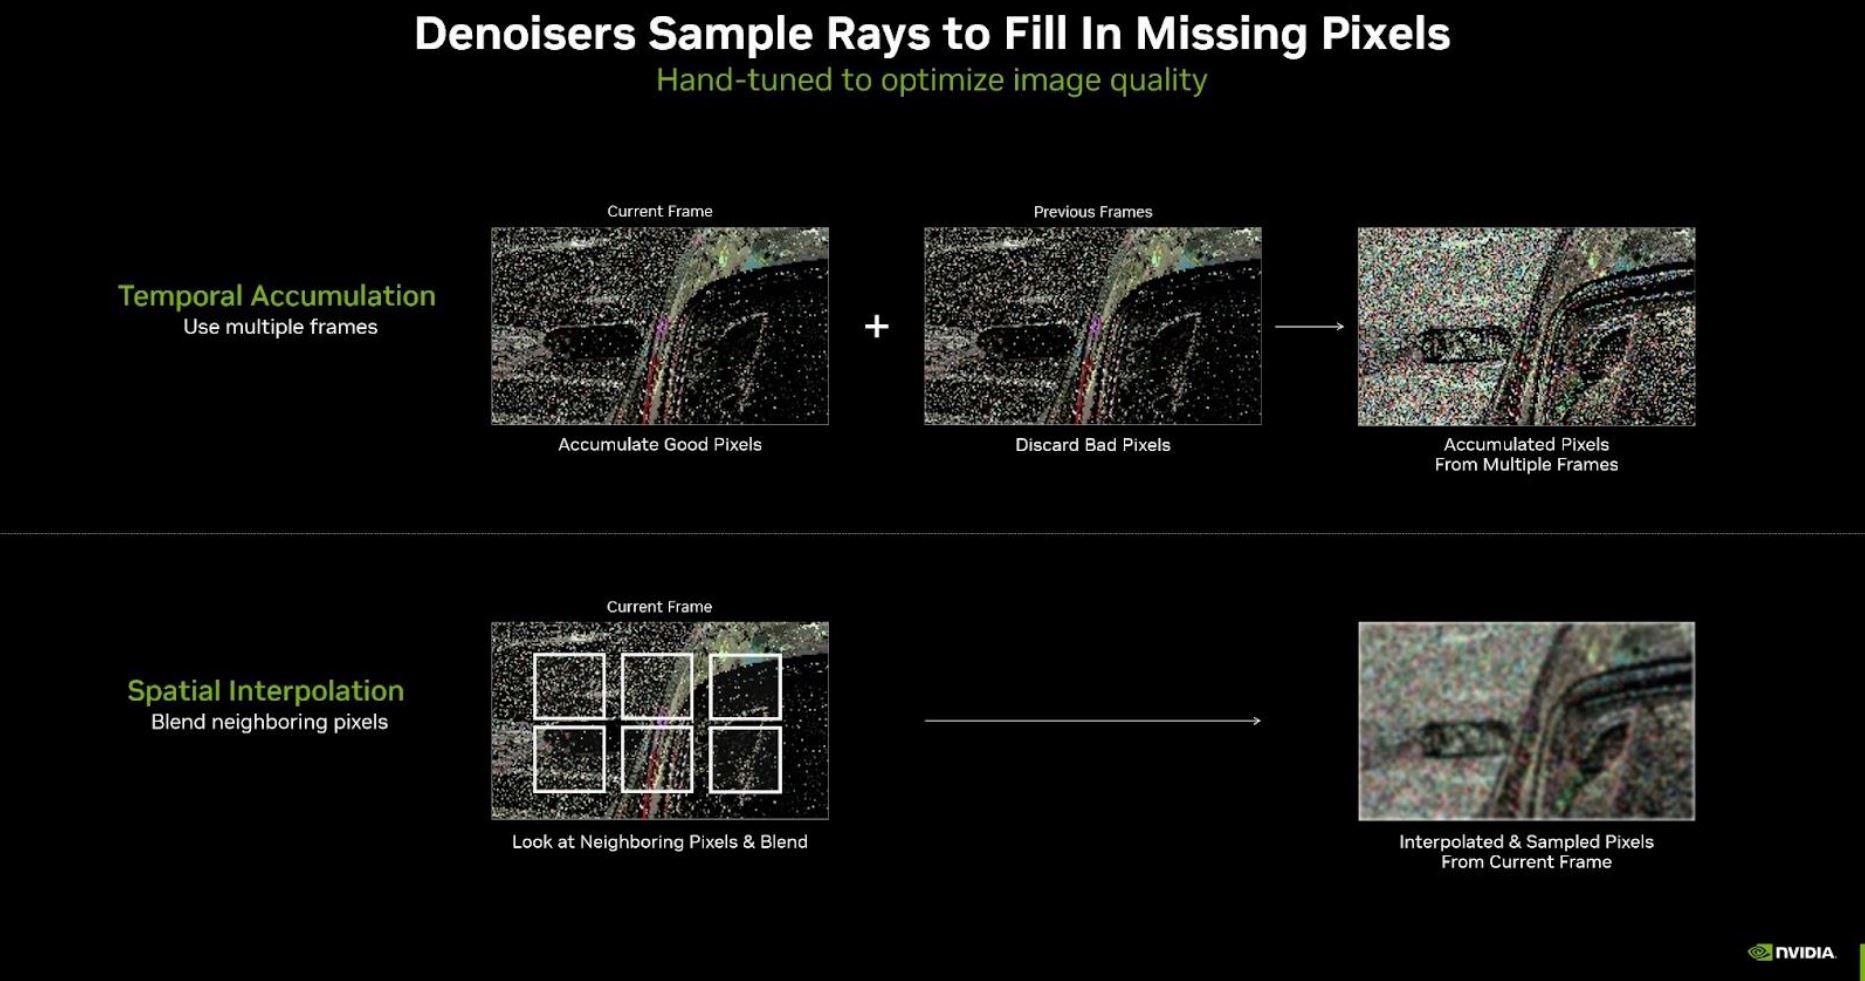 A slide showing why denoisers are necessary for ray tracing.